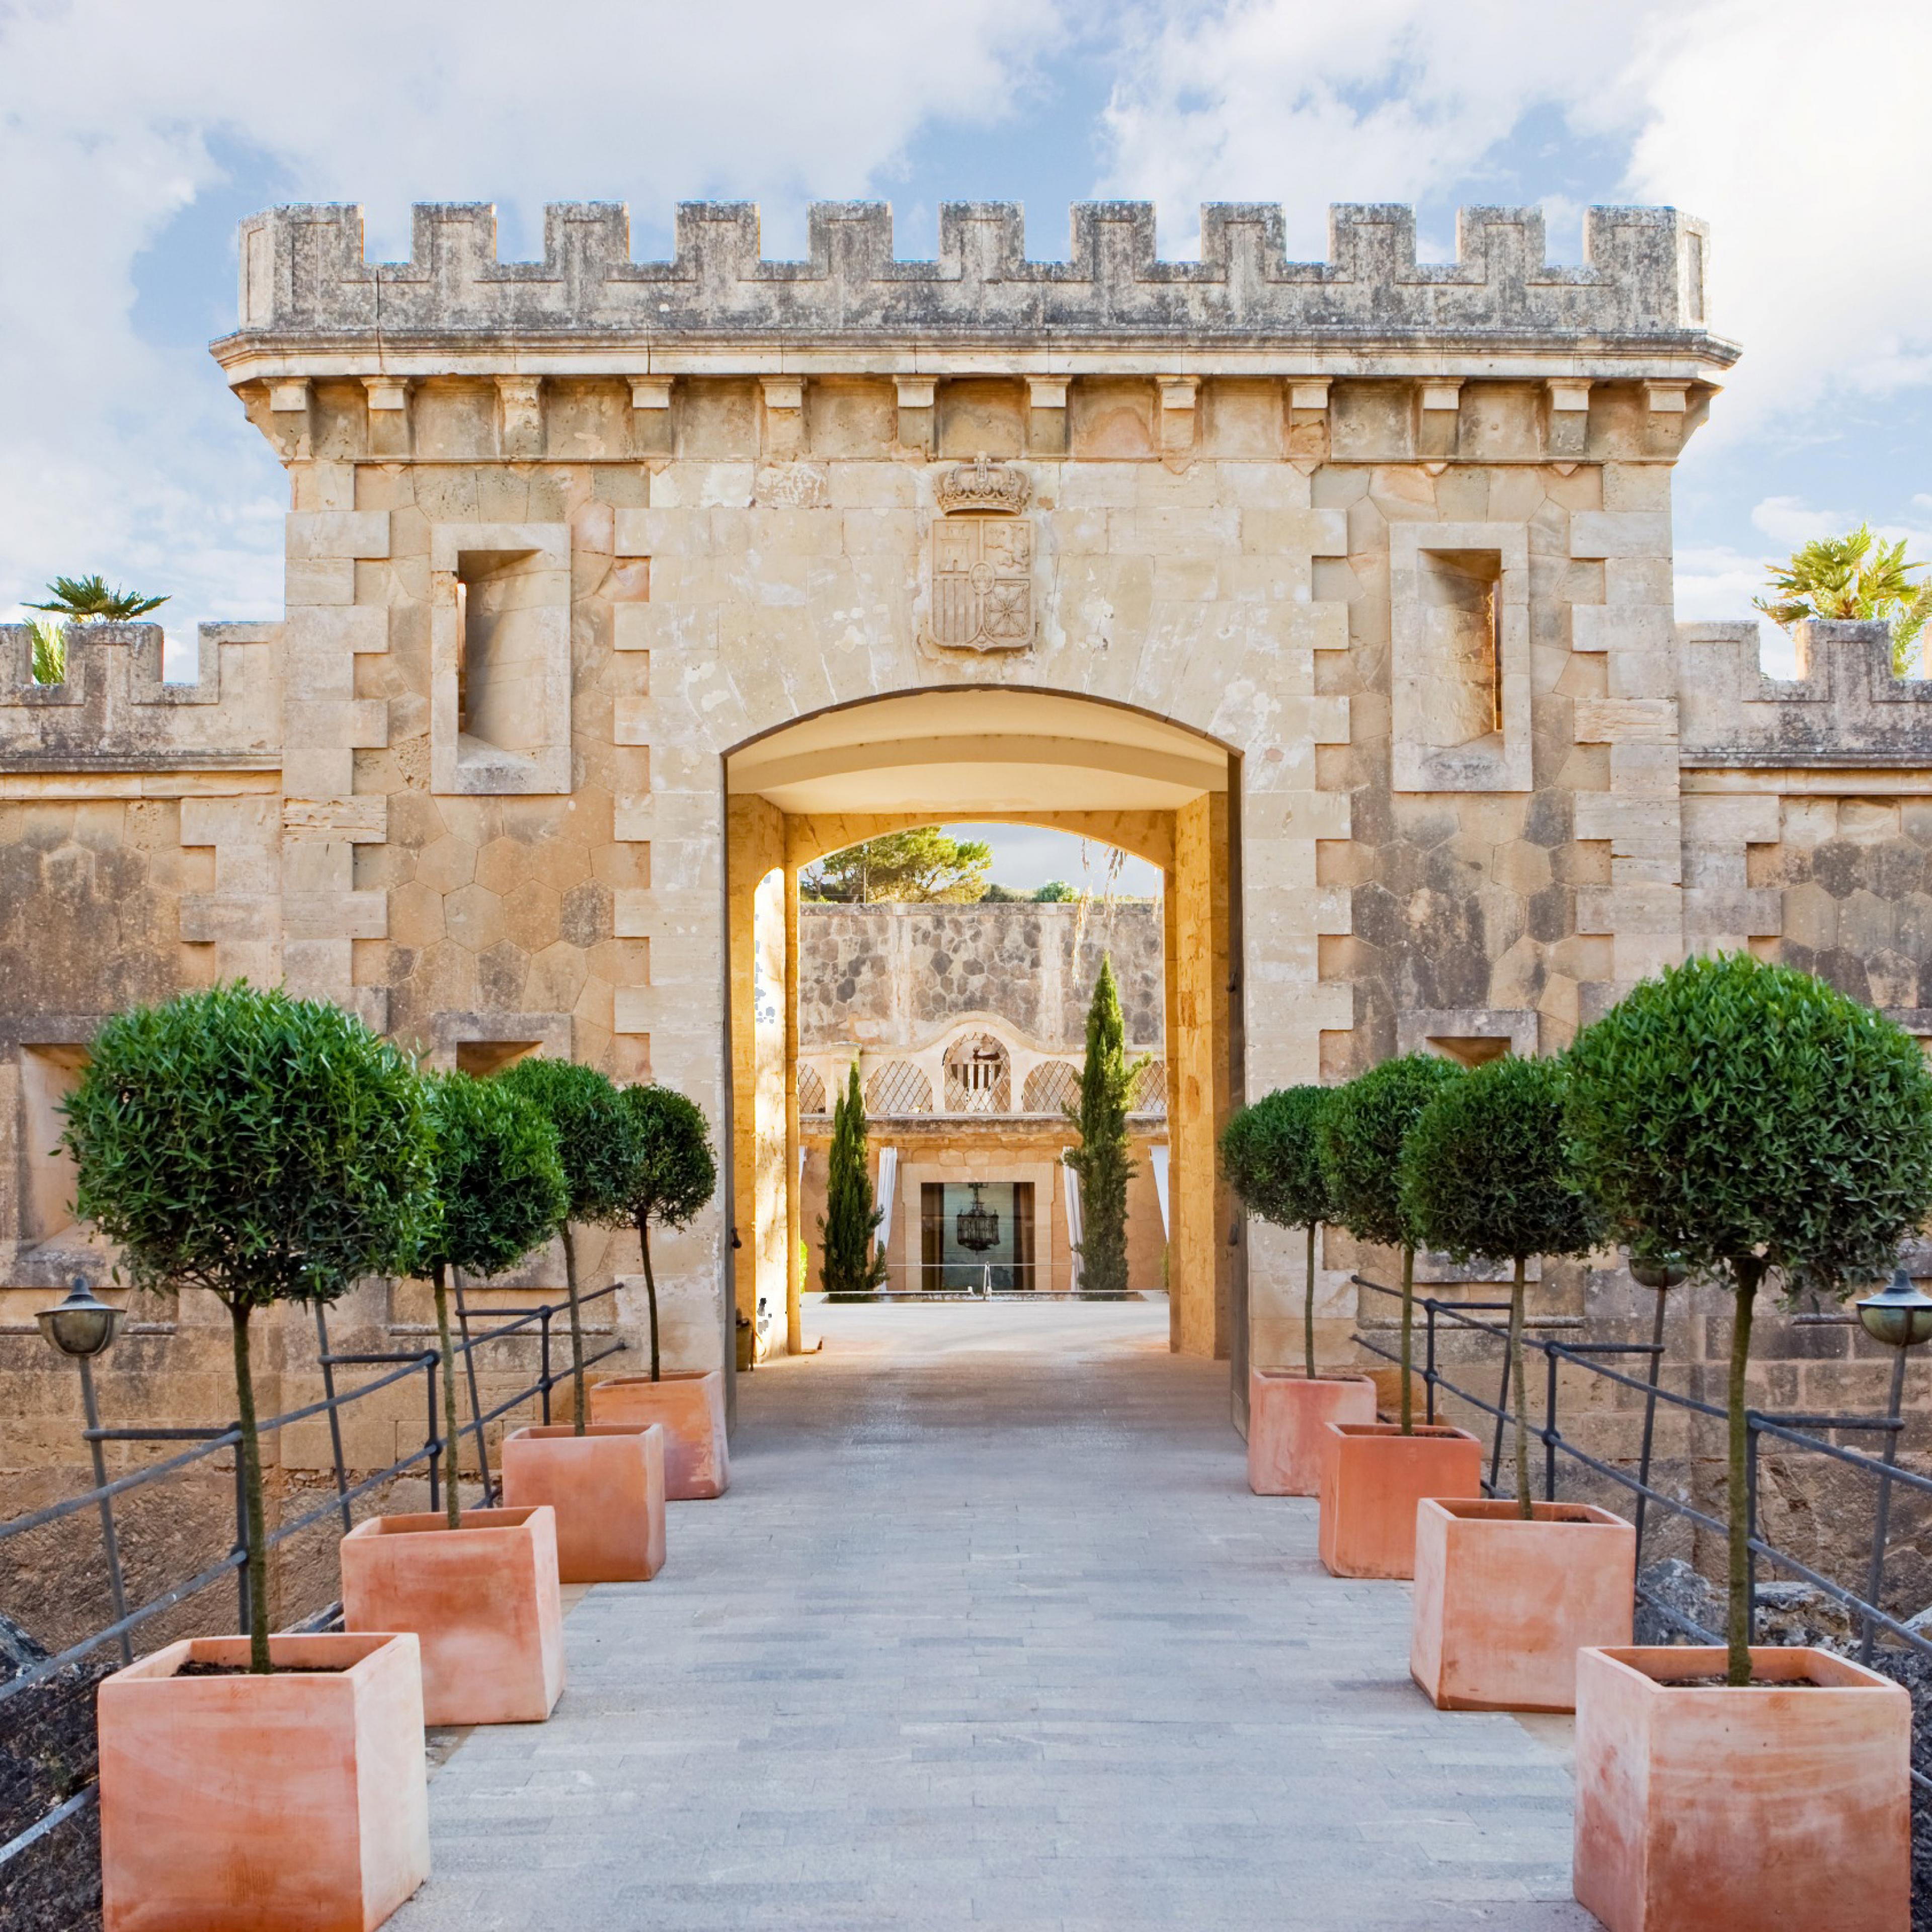 view of historic medieval fort entrance made of peachy colored stone with potted plants in front of entrance